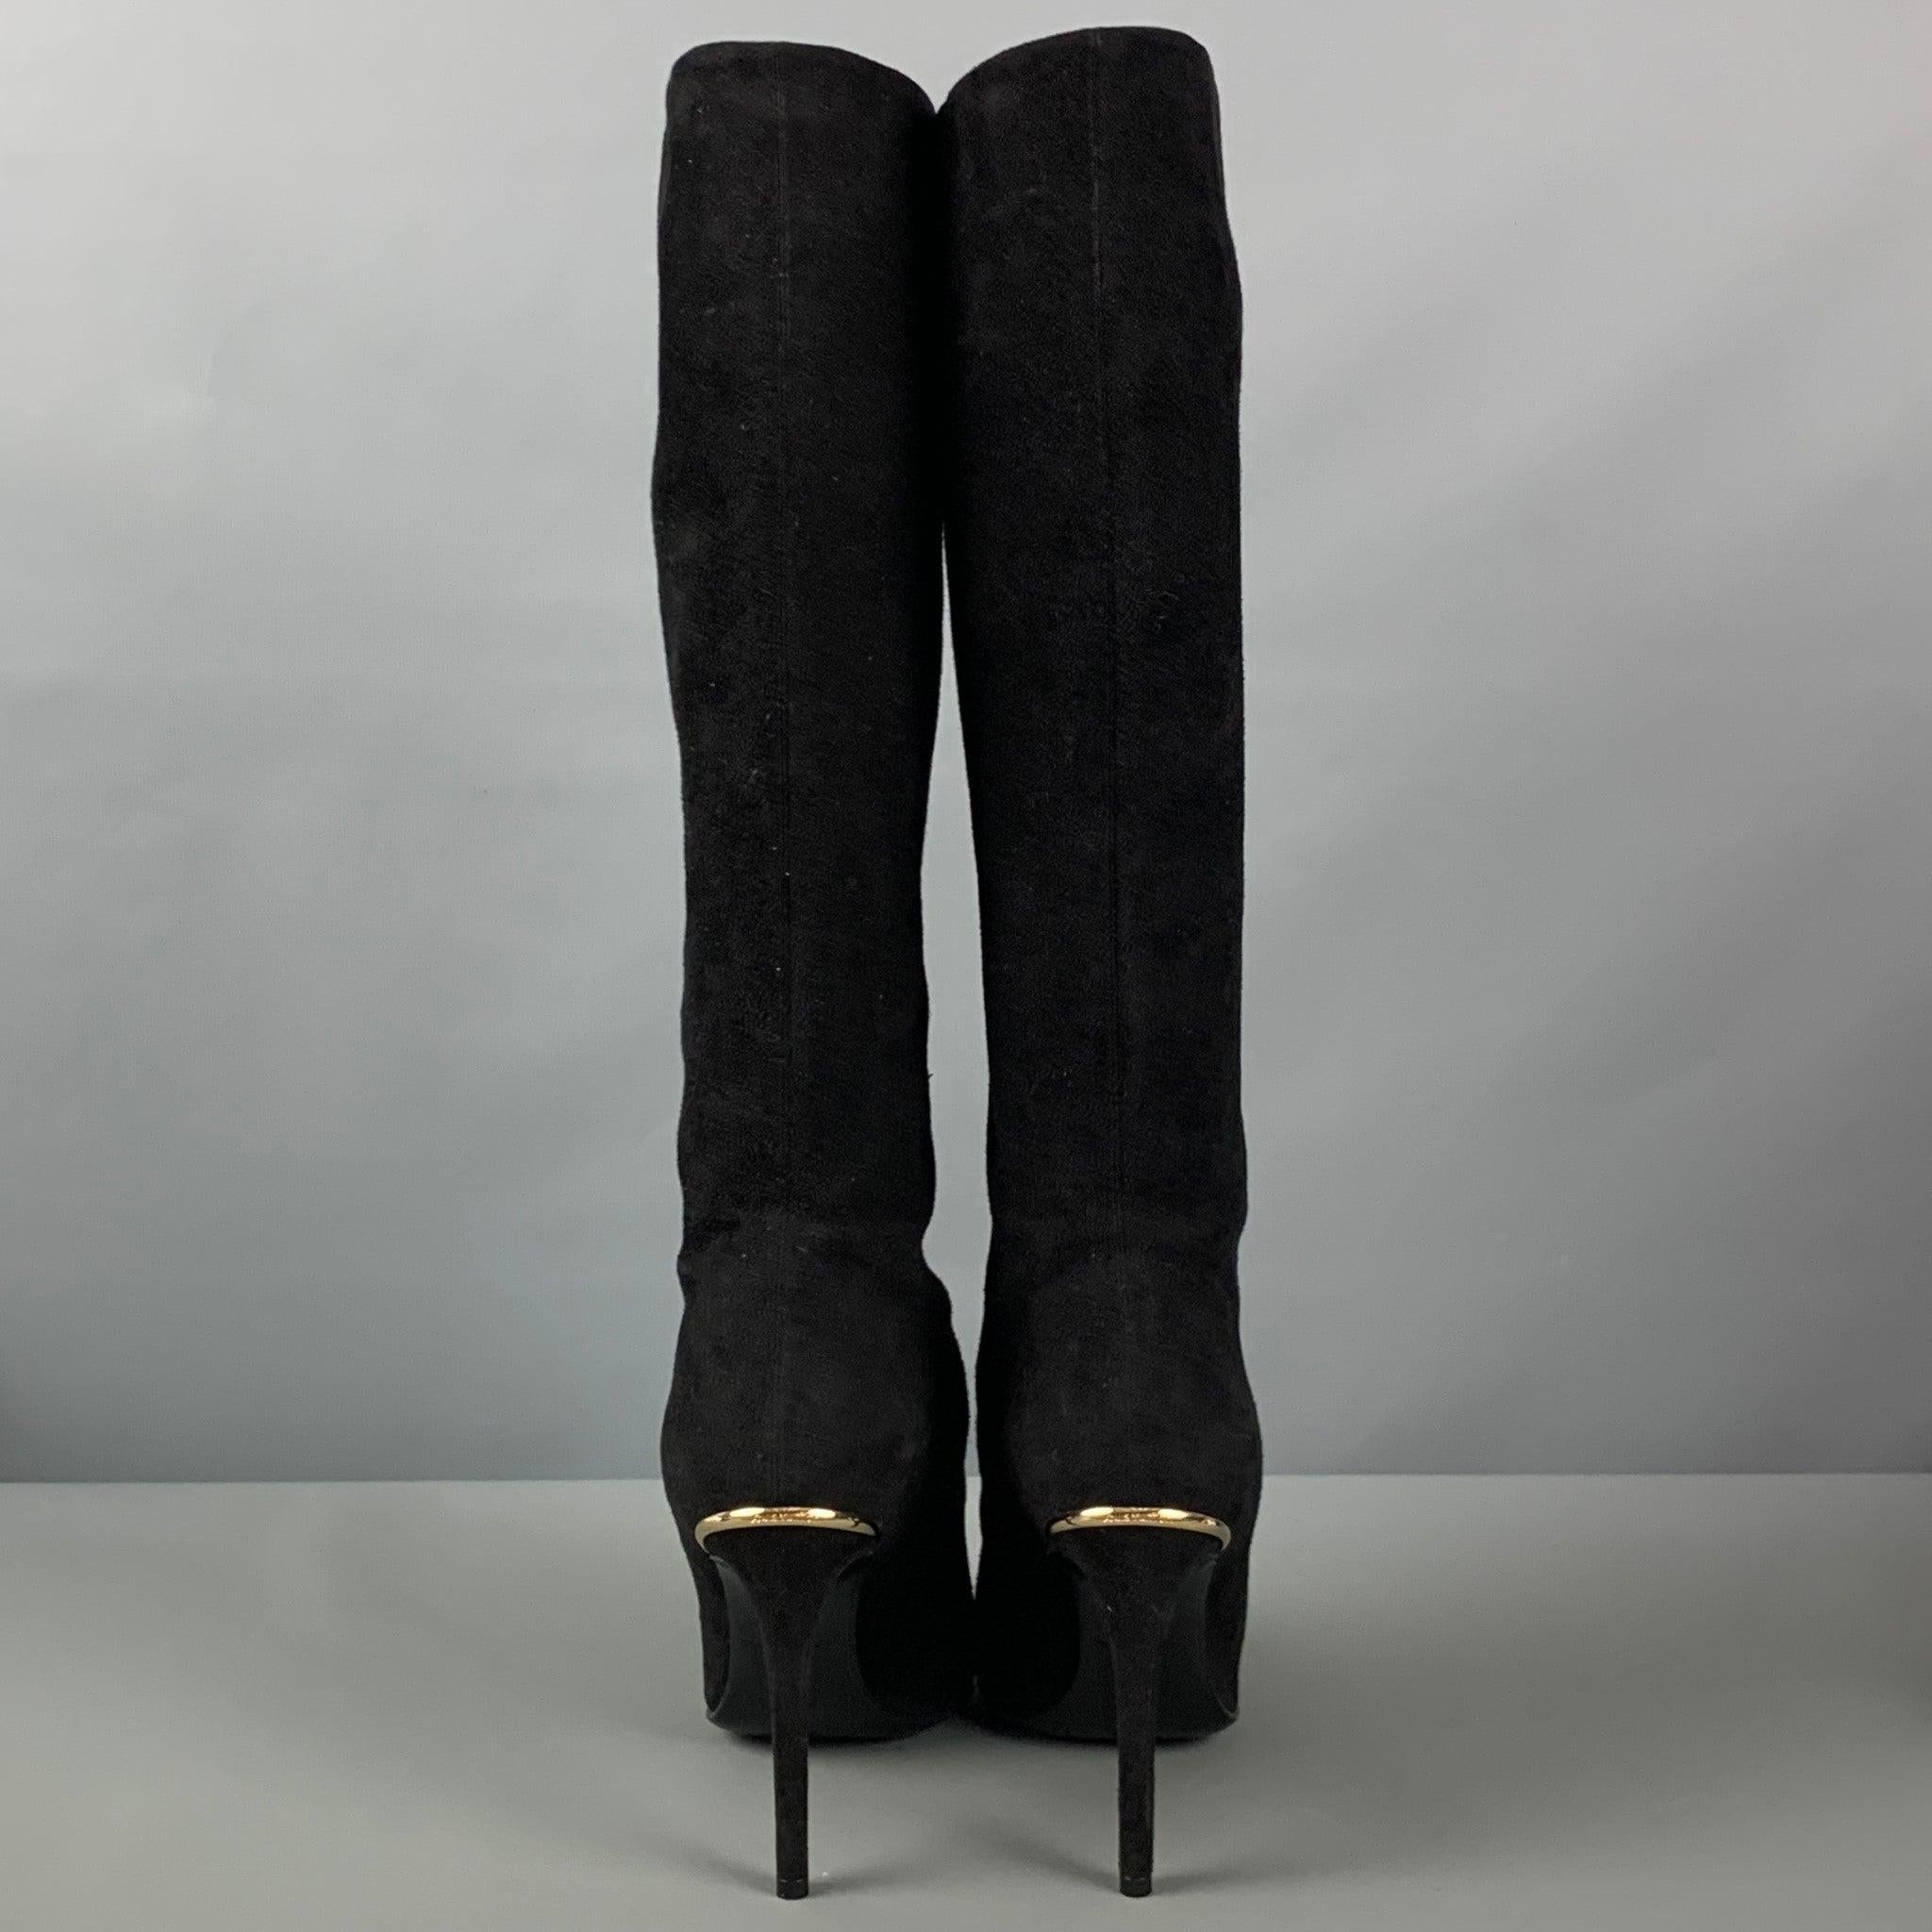 LOUIS VUITTON Size 7 Black Suede Pull On Boots In Good Condition For Sale In San Francisco, CA